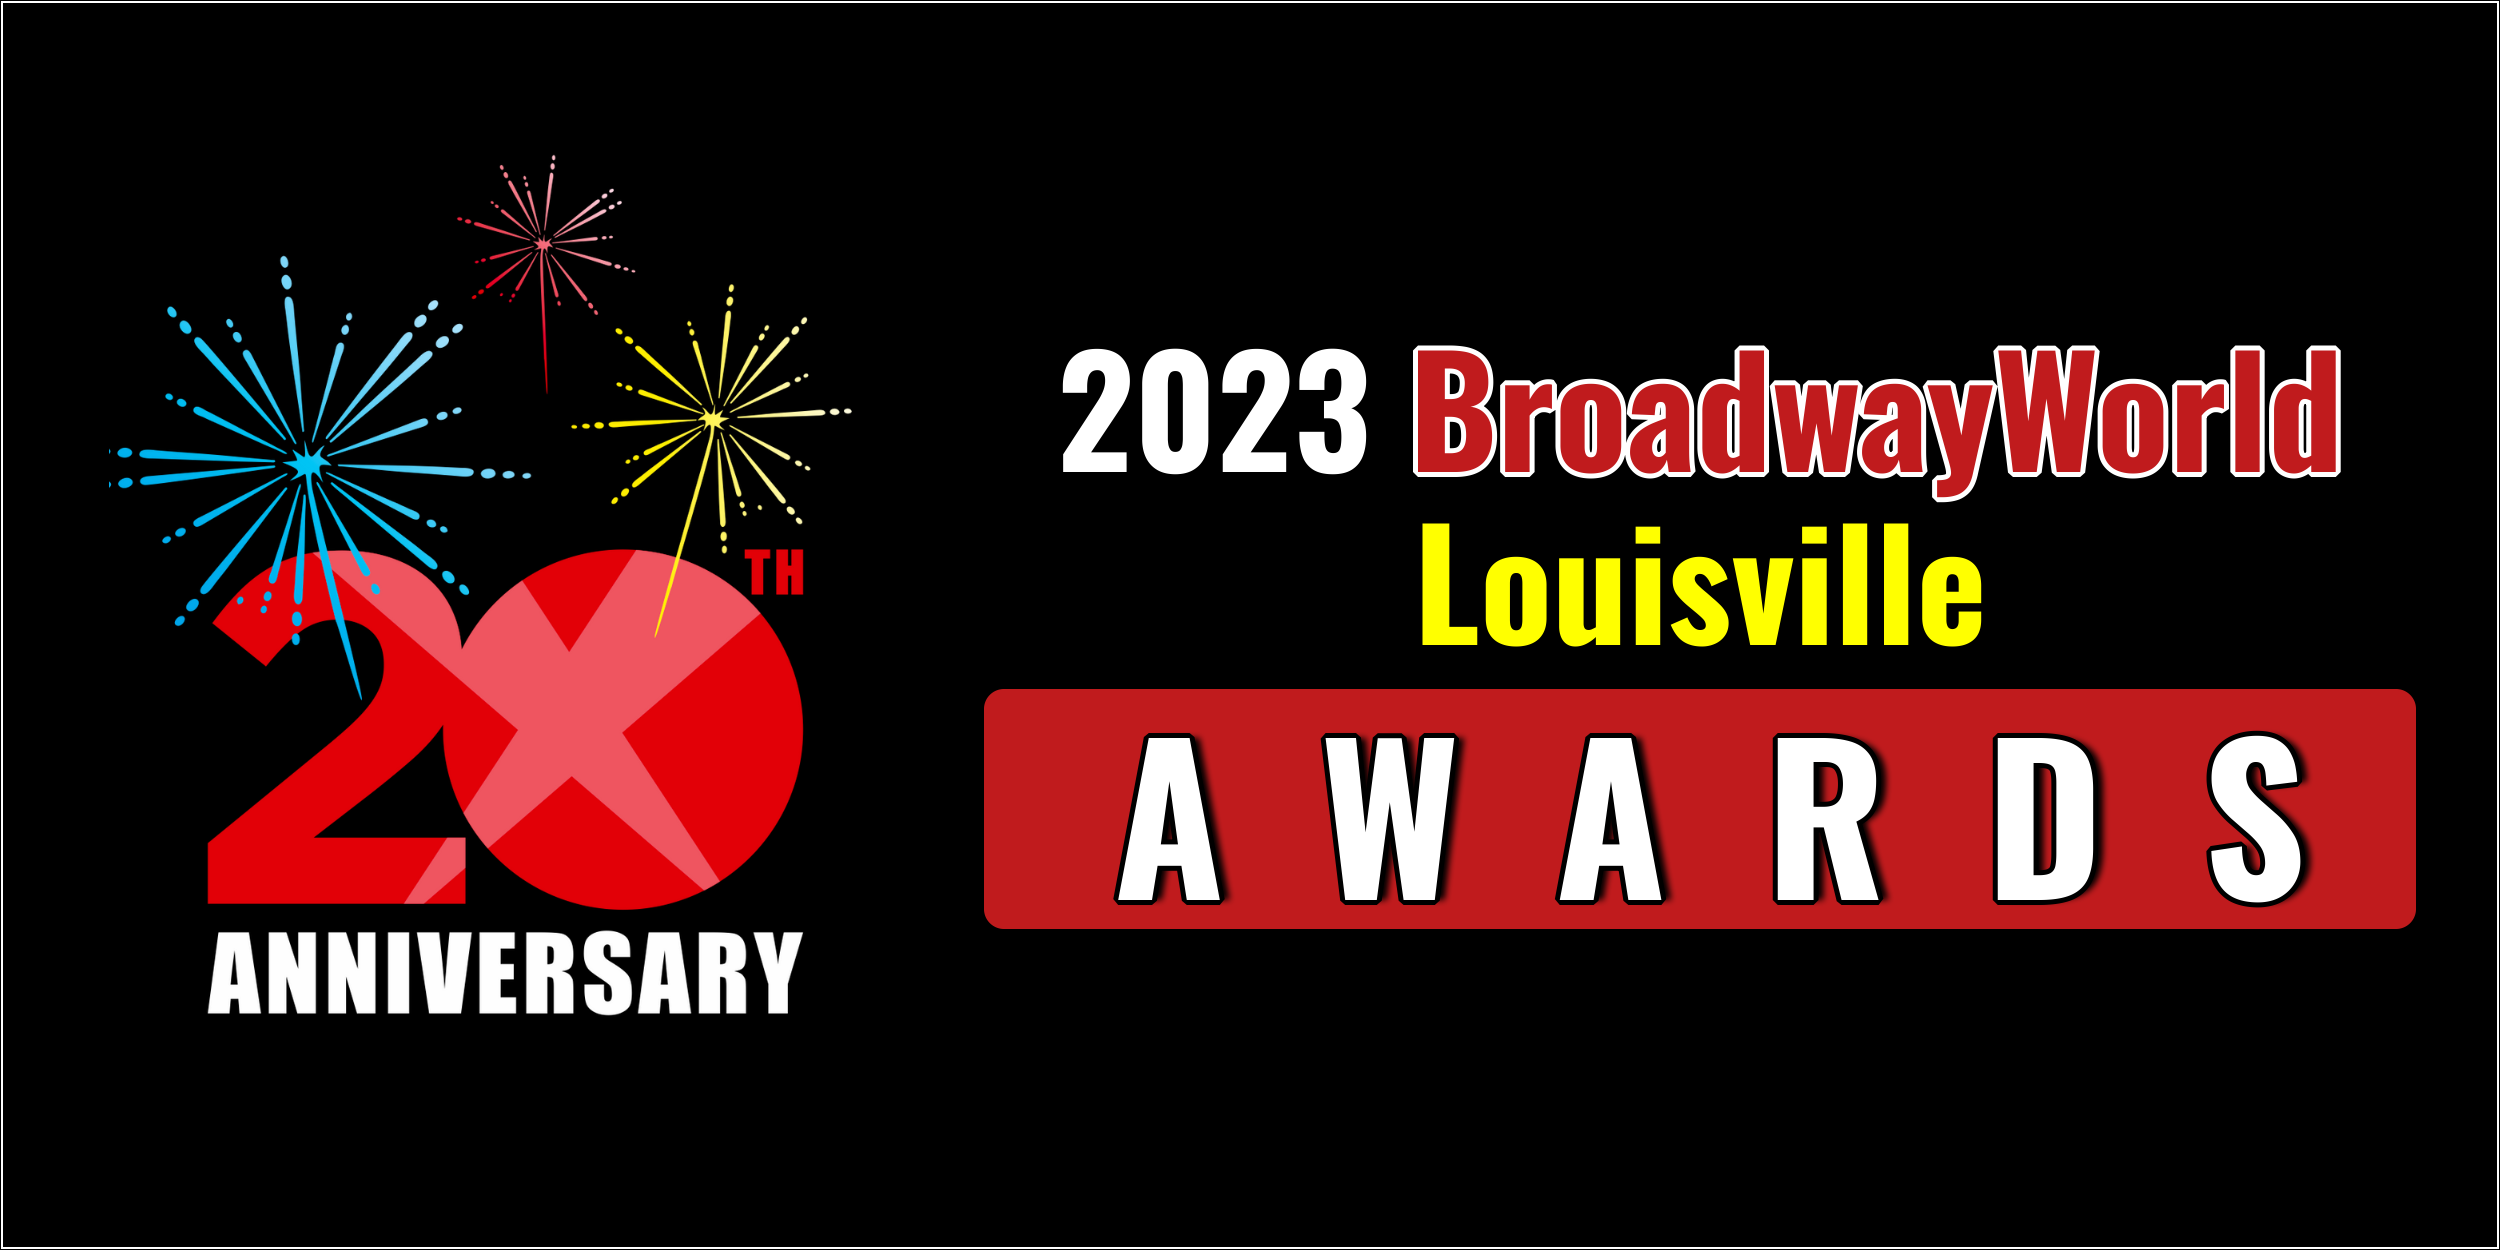 Latest Standings Announced For The 2023 BroadwayWorld Louisville Awards; JESUS CHRIST SUPE Photo